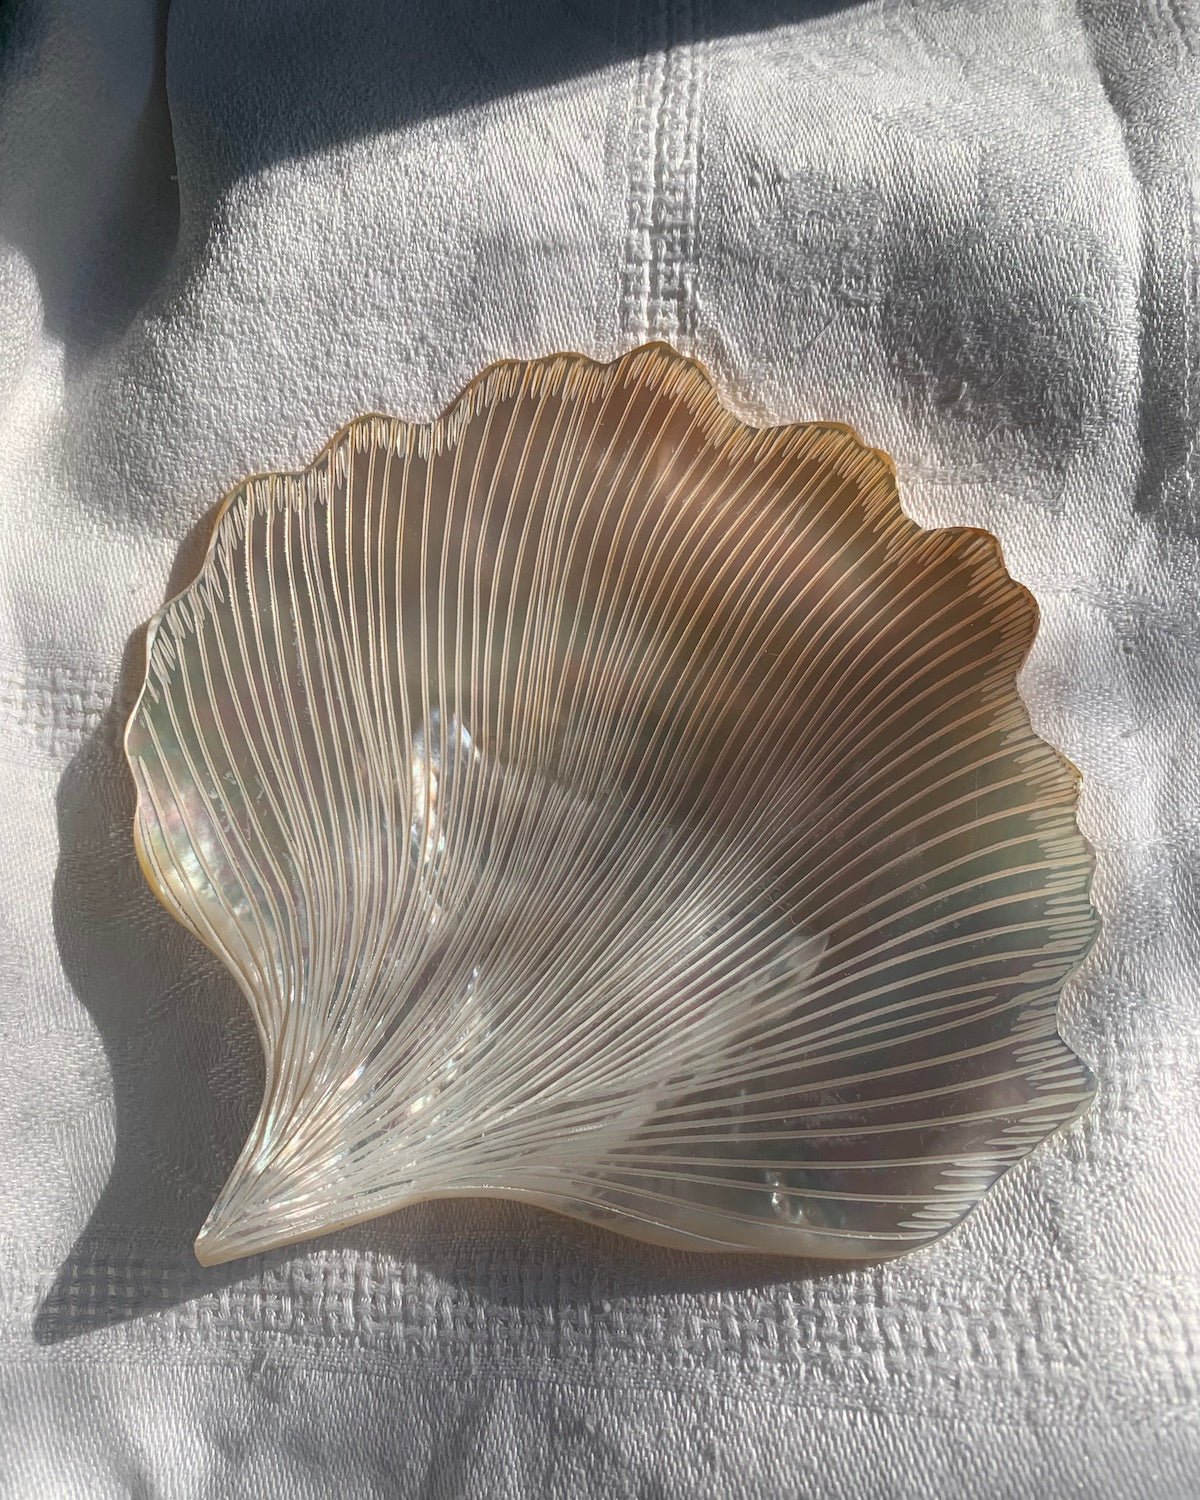 Mother of Pearl Shell Dish for Trinkets or Caviar | Decorative Dish | Handmade in Myanmar - YGN Collective